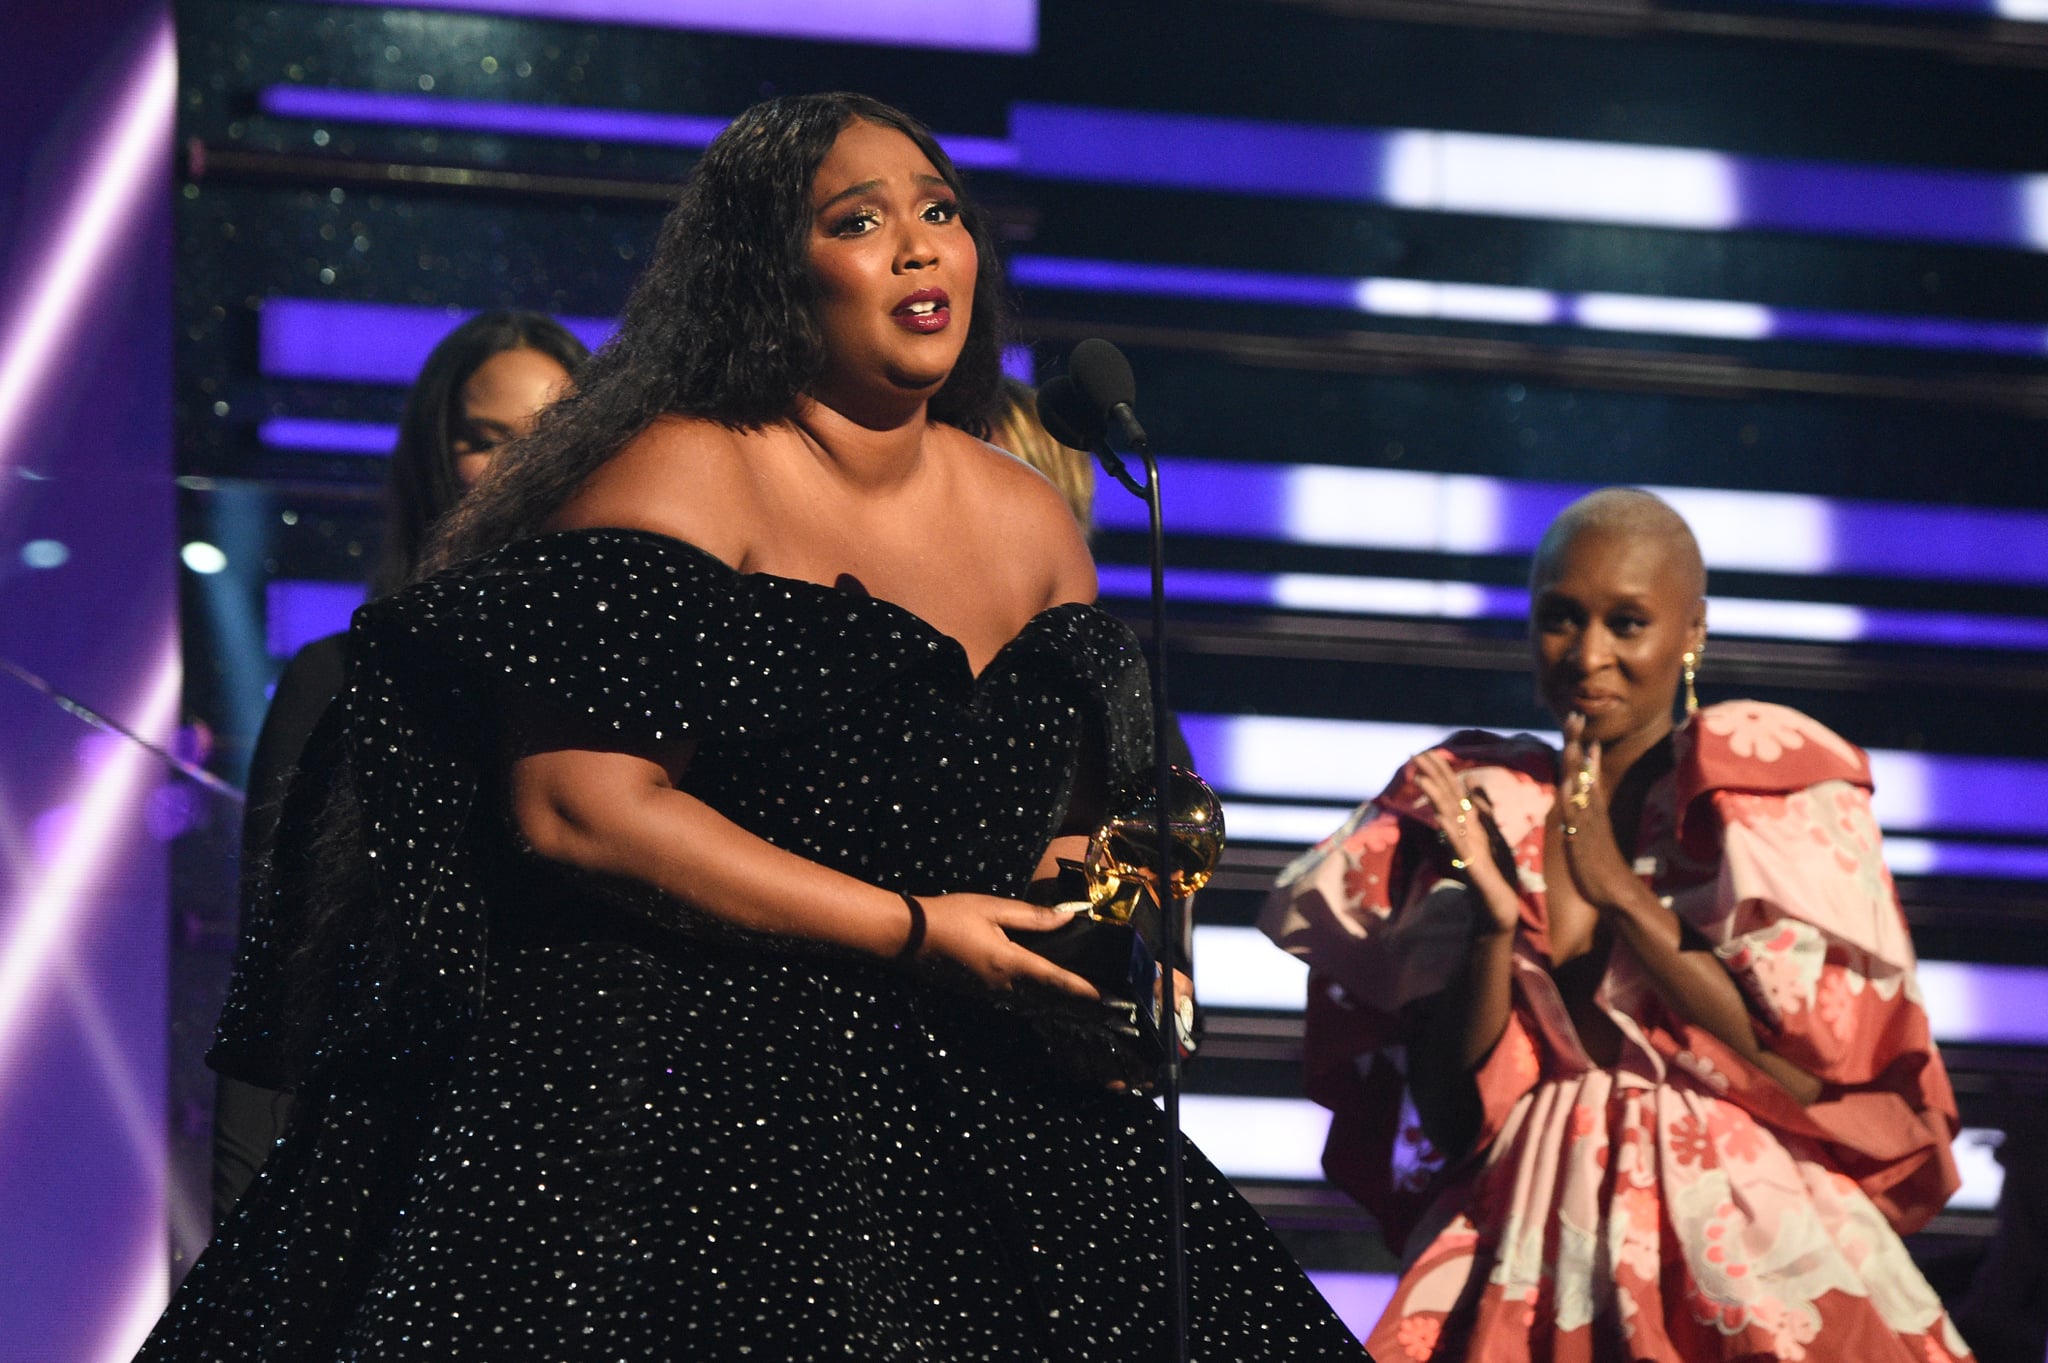 LOS ANGELES, CALIFORNIA - JANUARY 26: Lizzo accepts award for Best Urban Contemporary Album For 'Cuz I Love You (Deluxe) during the during the 62nd Annual GRAMMY Awards at STAPLES Center on January 26, 2020 in Los Angeles, California. (Photo by Kevin Mazur/Getty Images for The Recording Academy)